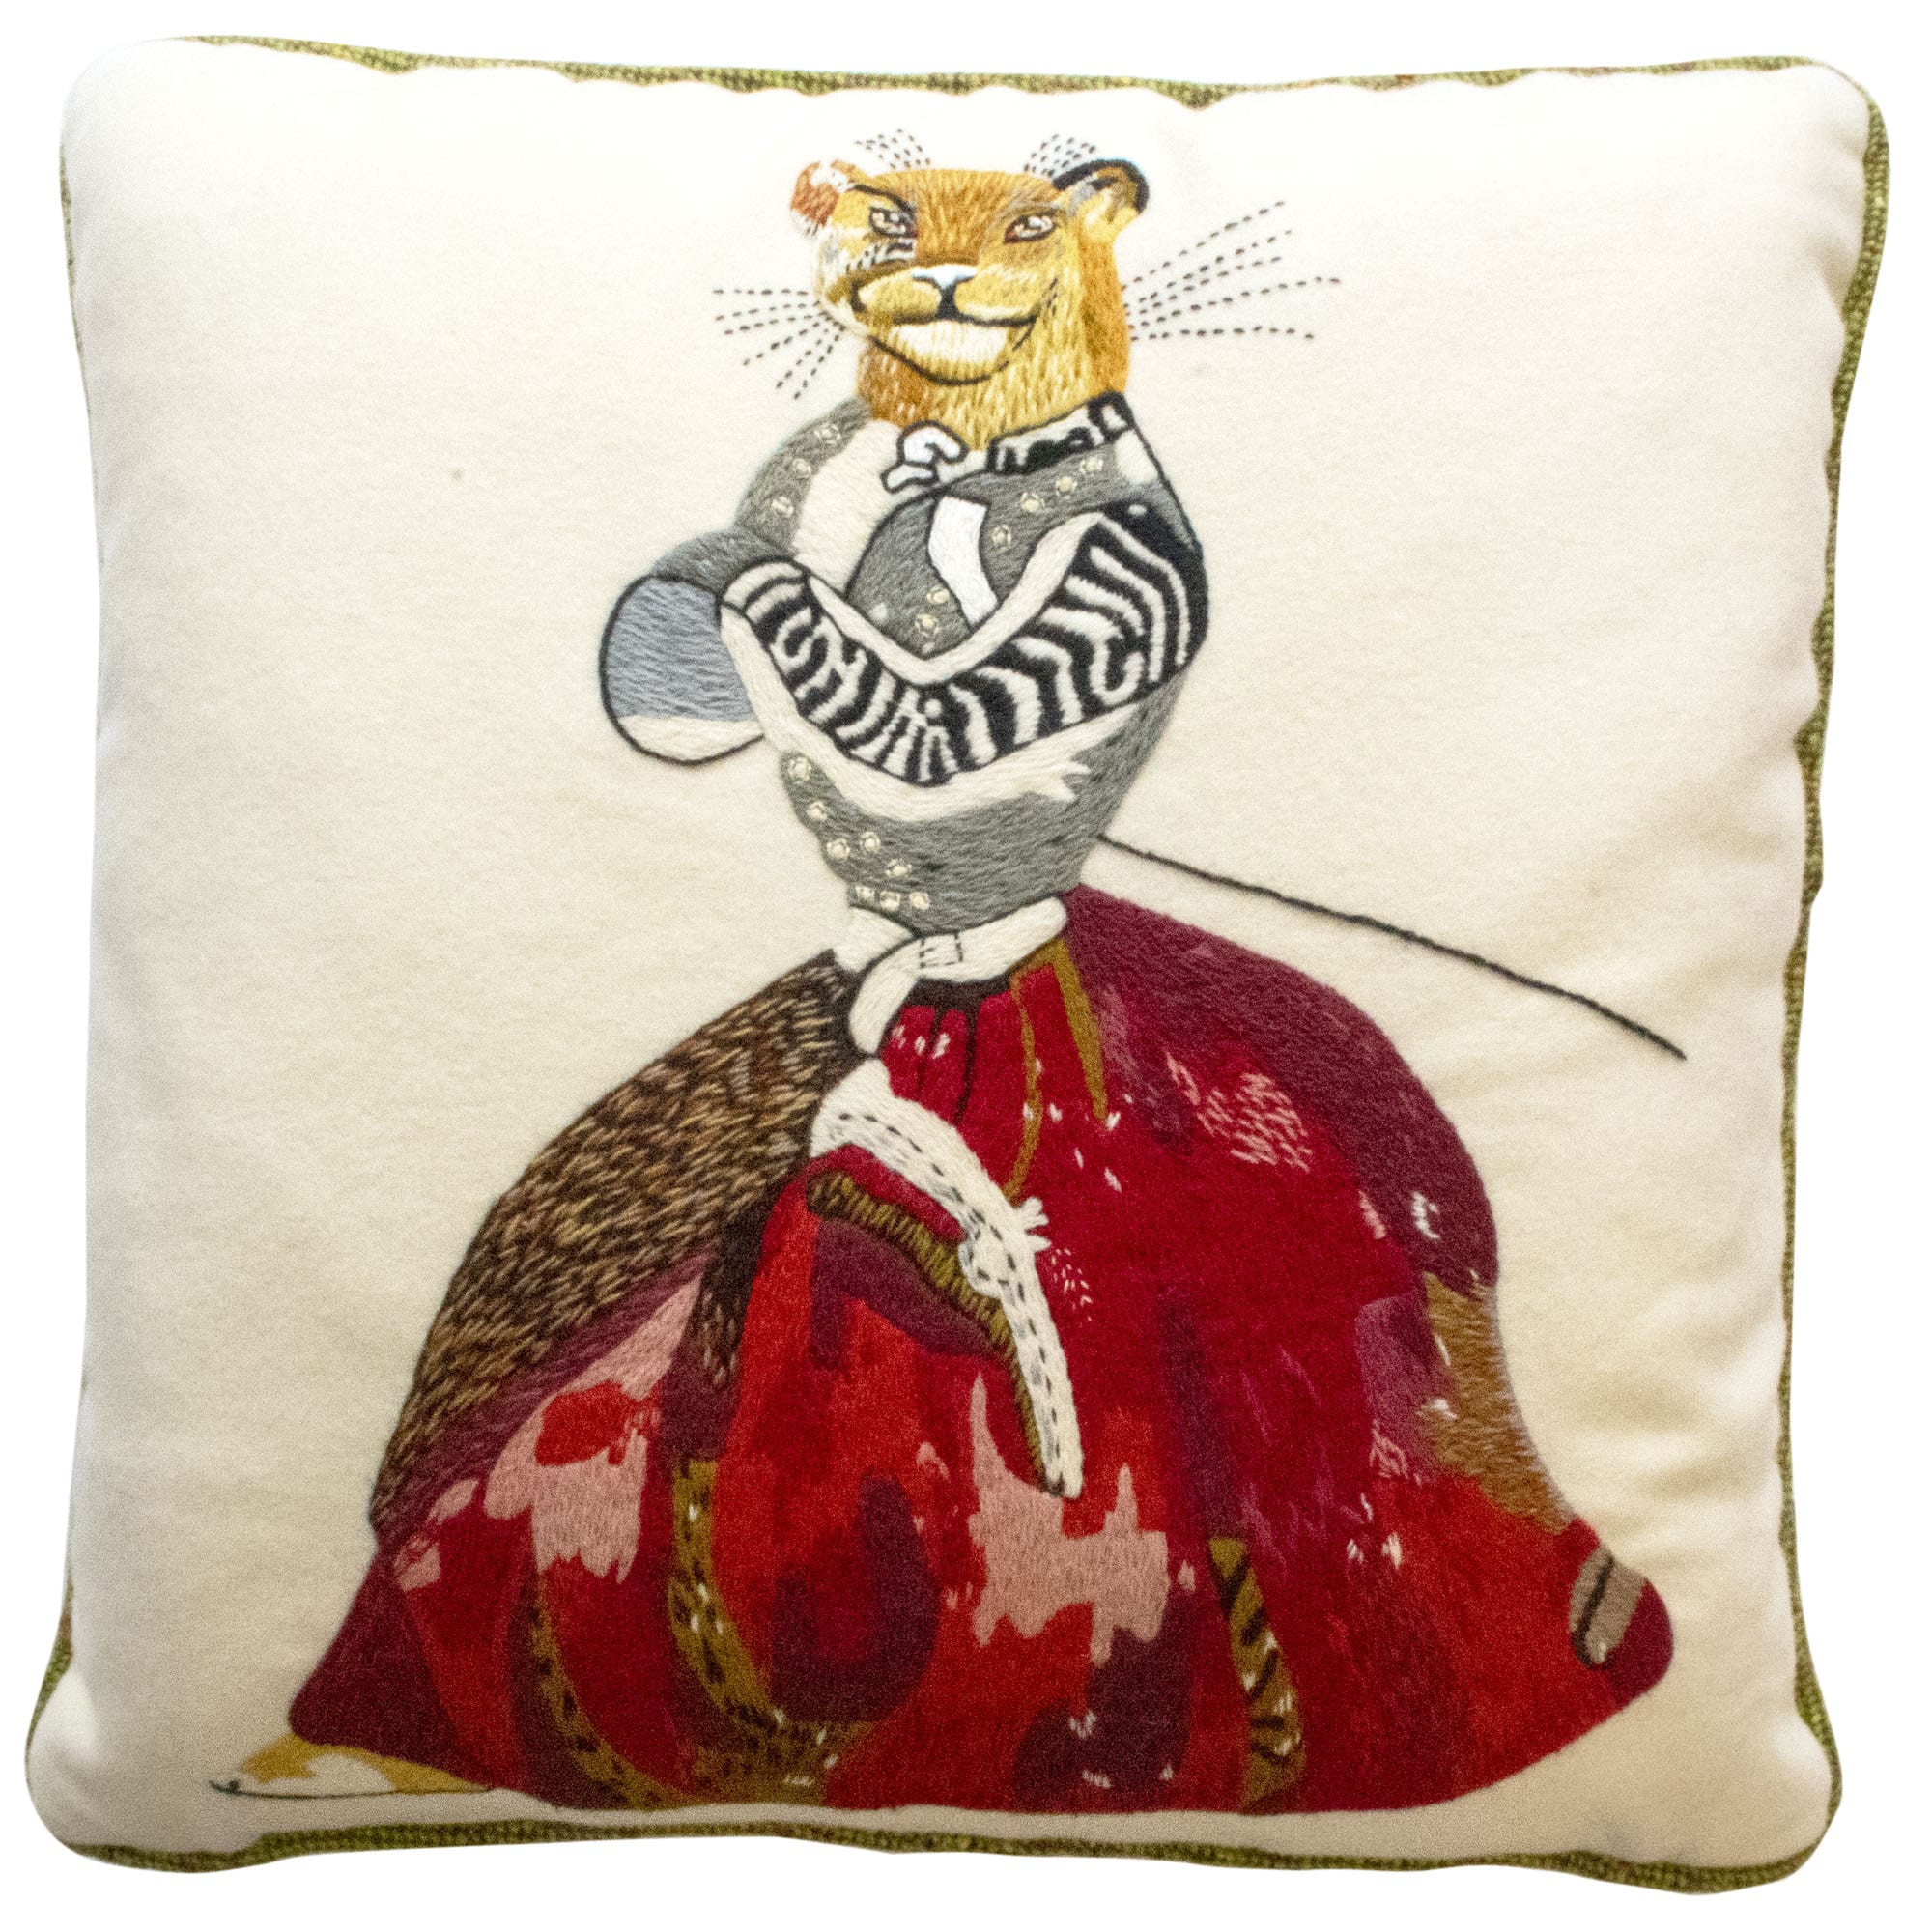 Animaux Hand-Embroidered Lioness Wool Cream Red Cushion Fine Cell Work Handmade in Prison